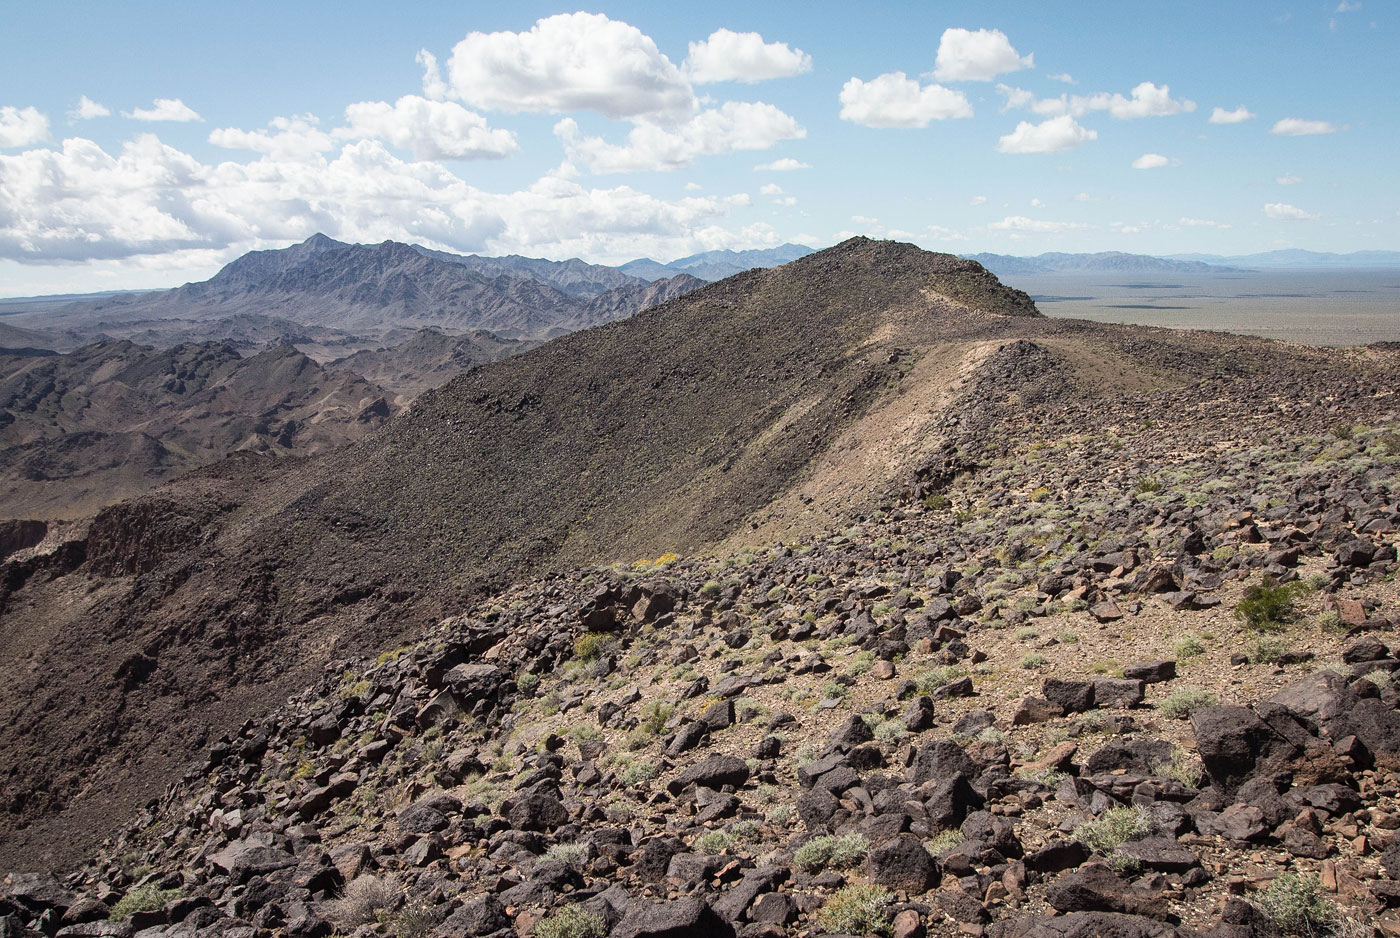 Hike Little Chuckwalla Mountains High Point in Little Chuckwalla Mountains Wilderness BLM, California - Stav is Lost